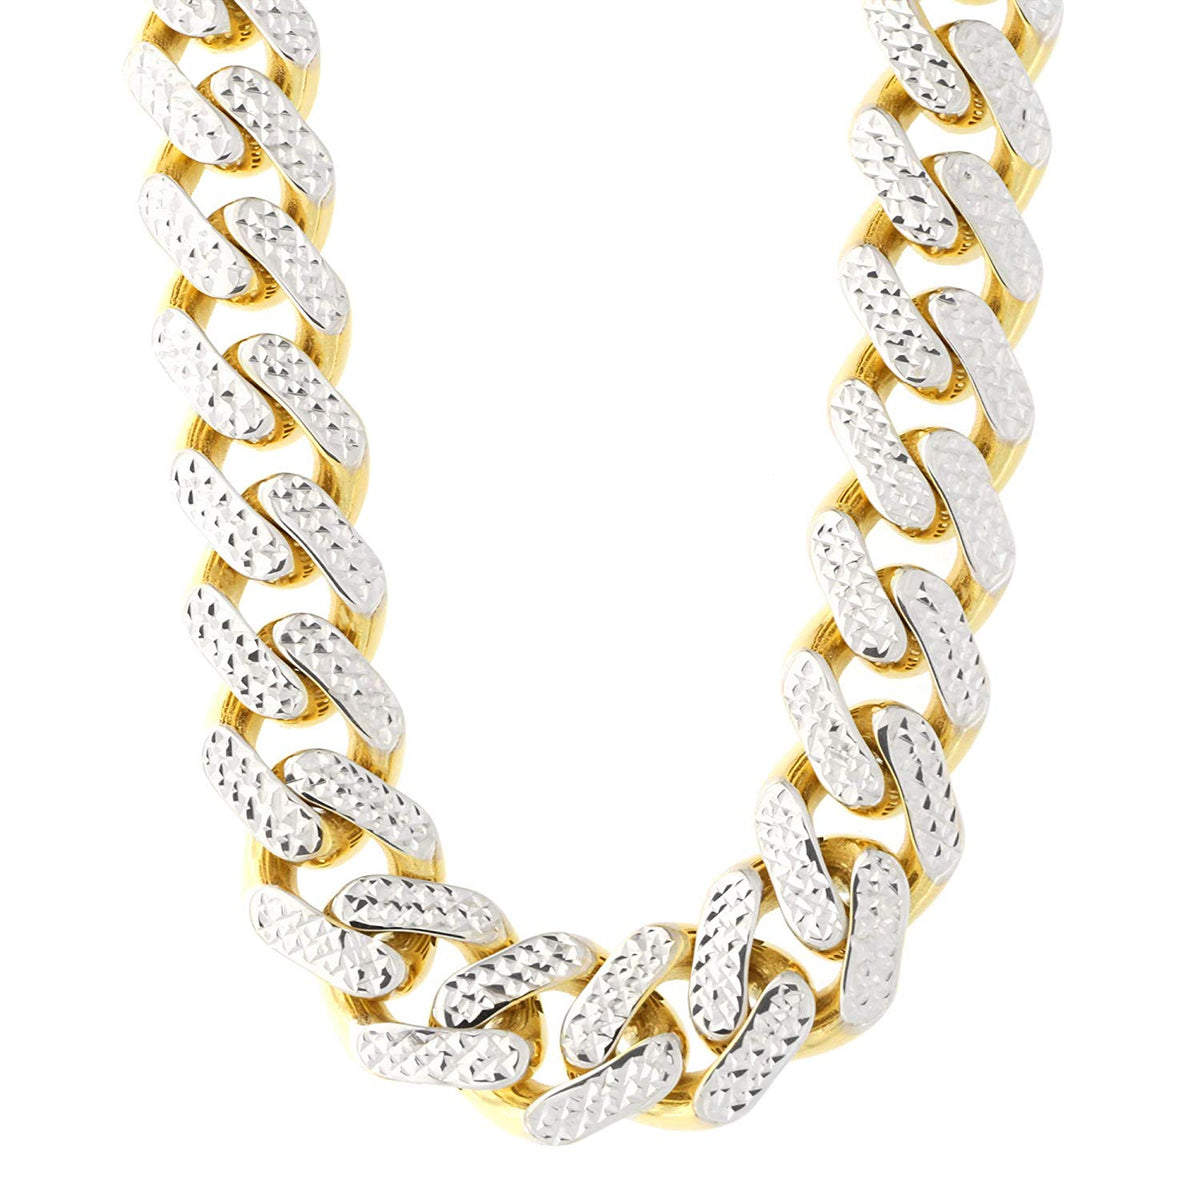 14k Yellow And White Gold Miami Cuban Pave Link Chain Necklace, Width 11.3mm, 24" fine designer jewelry for men and women